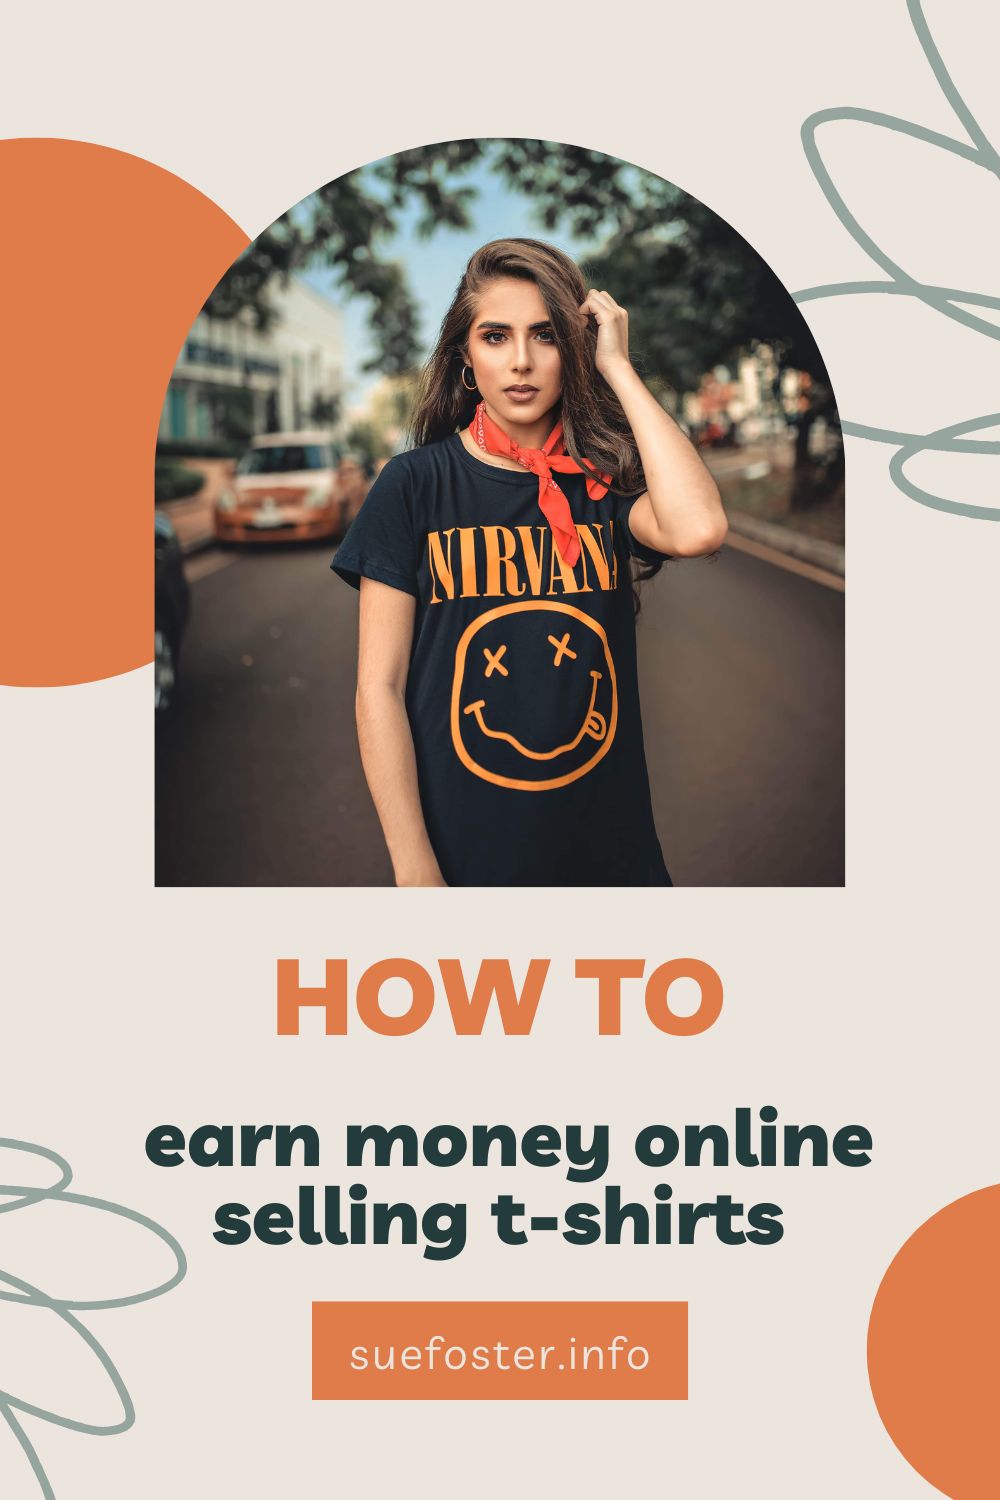 With a little hard work and dedication, you can make a substantial income from selling t-shirts online.